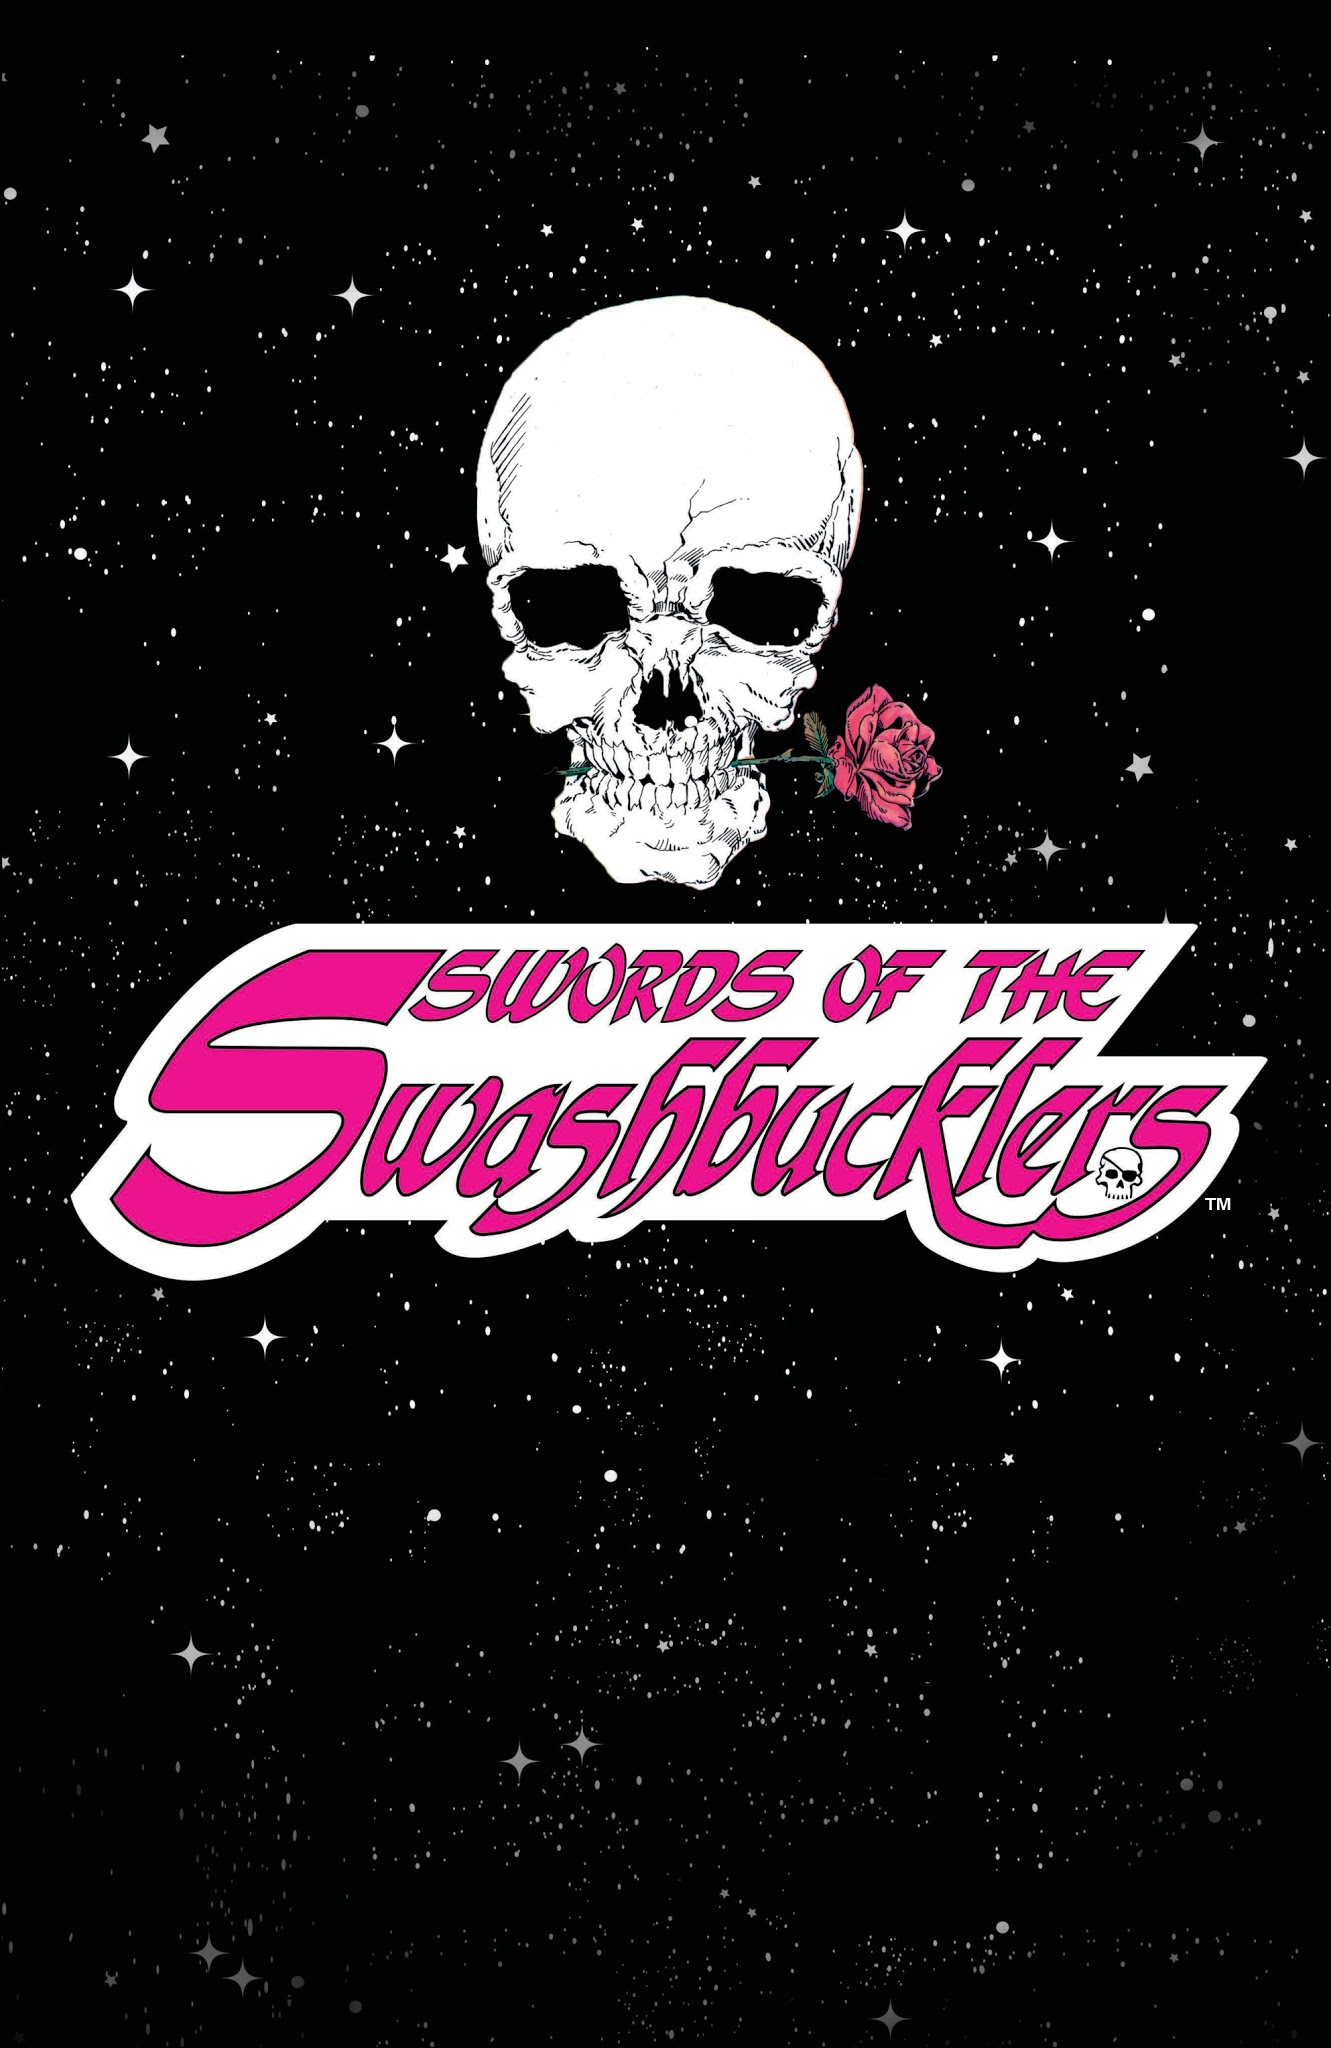 Read online Swords of the Swashbucklers comic -  Issue # TPB - 3